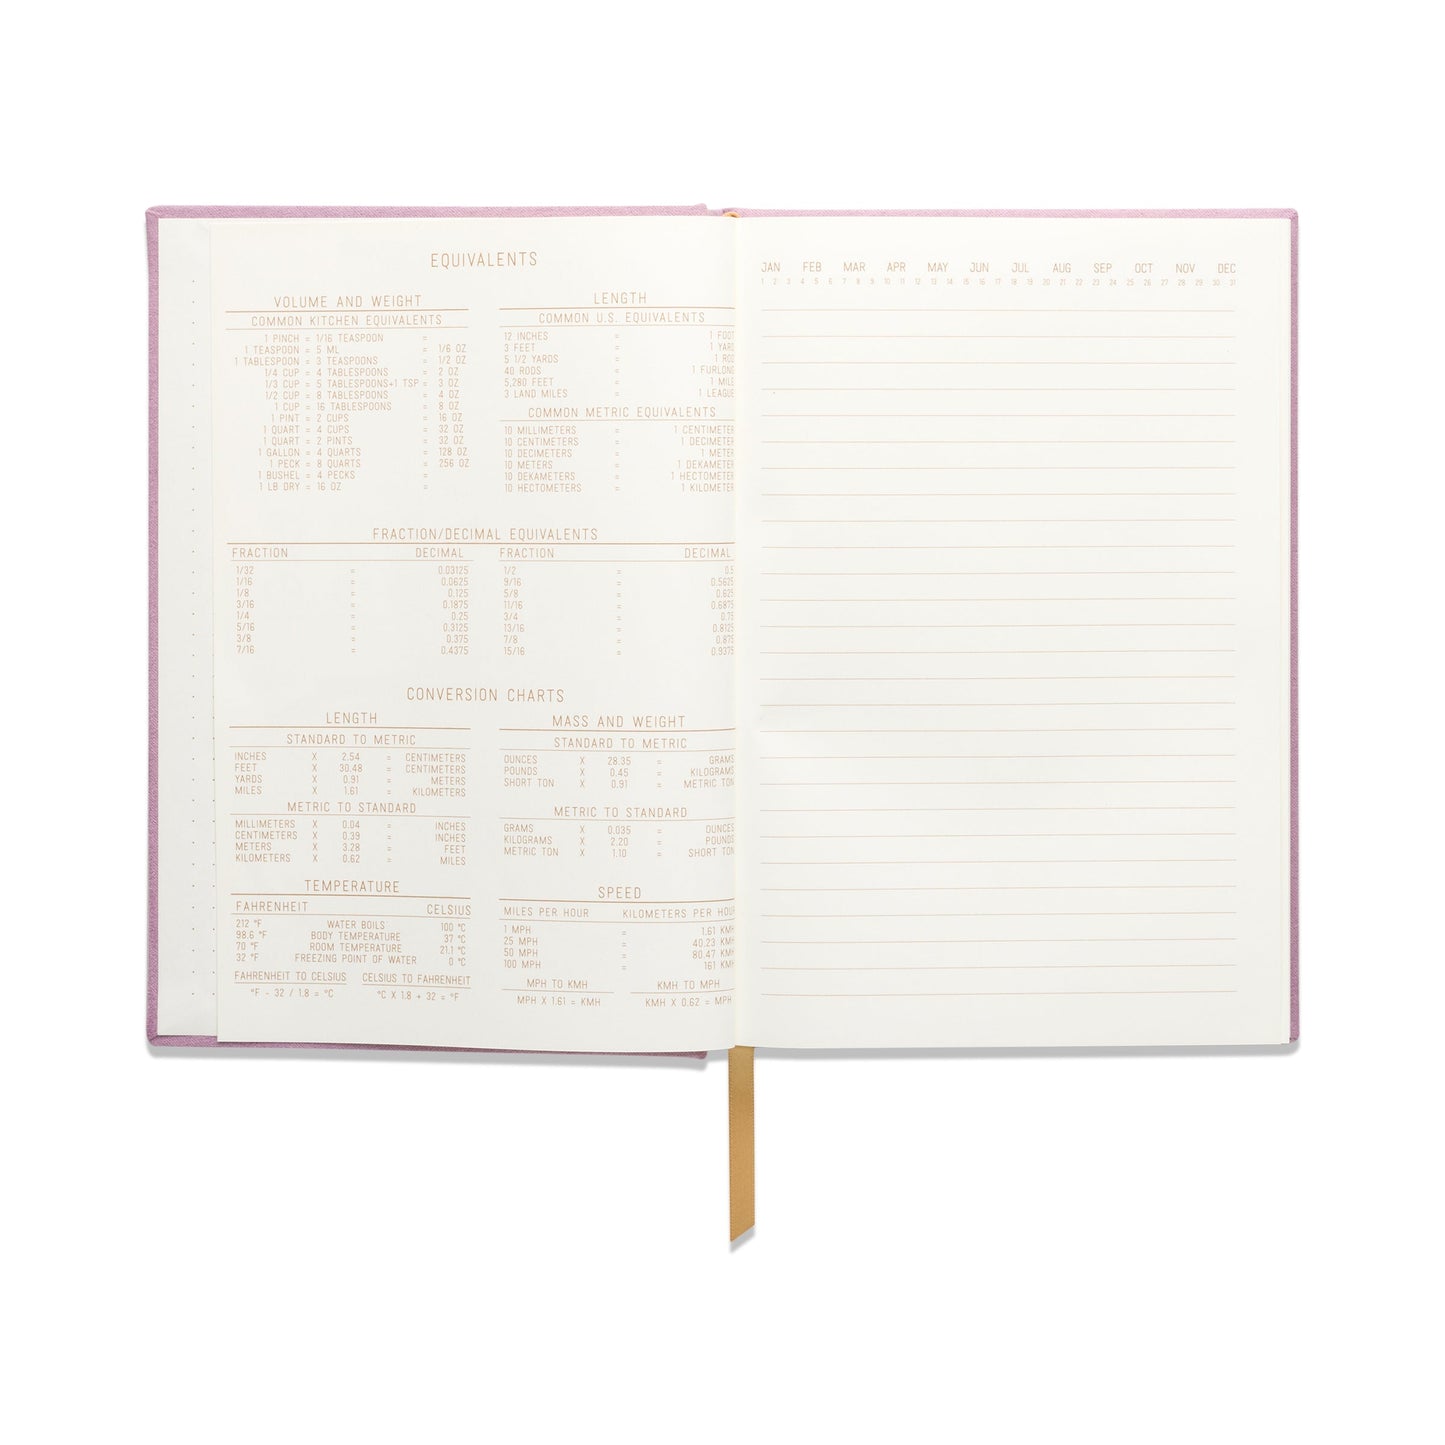 Hard Cover Suede Cloth Journal W/Pocket - Notes Lilac